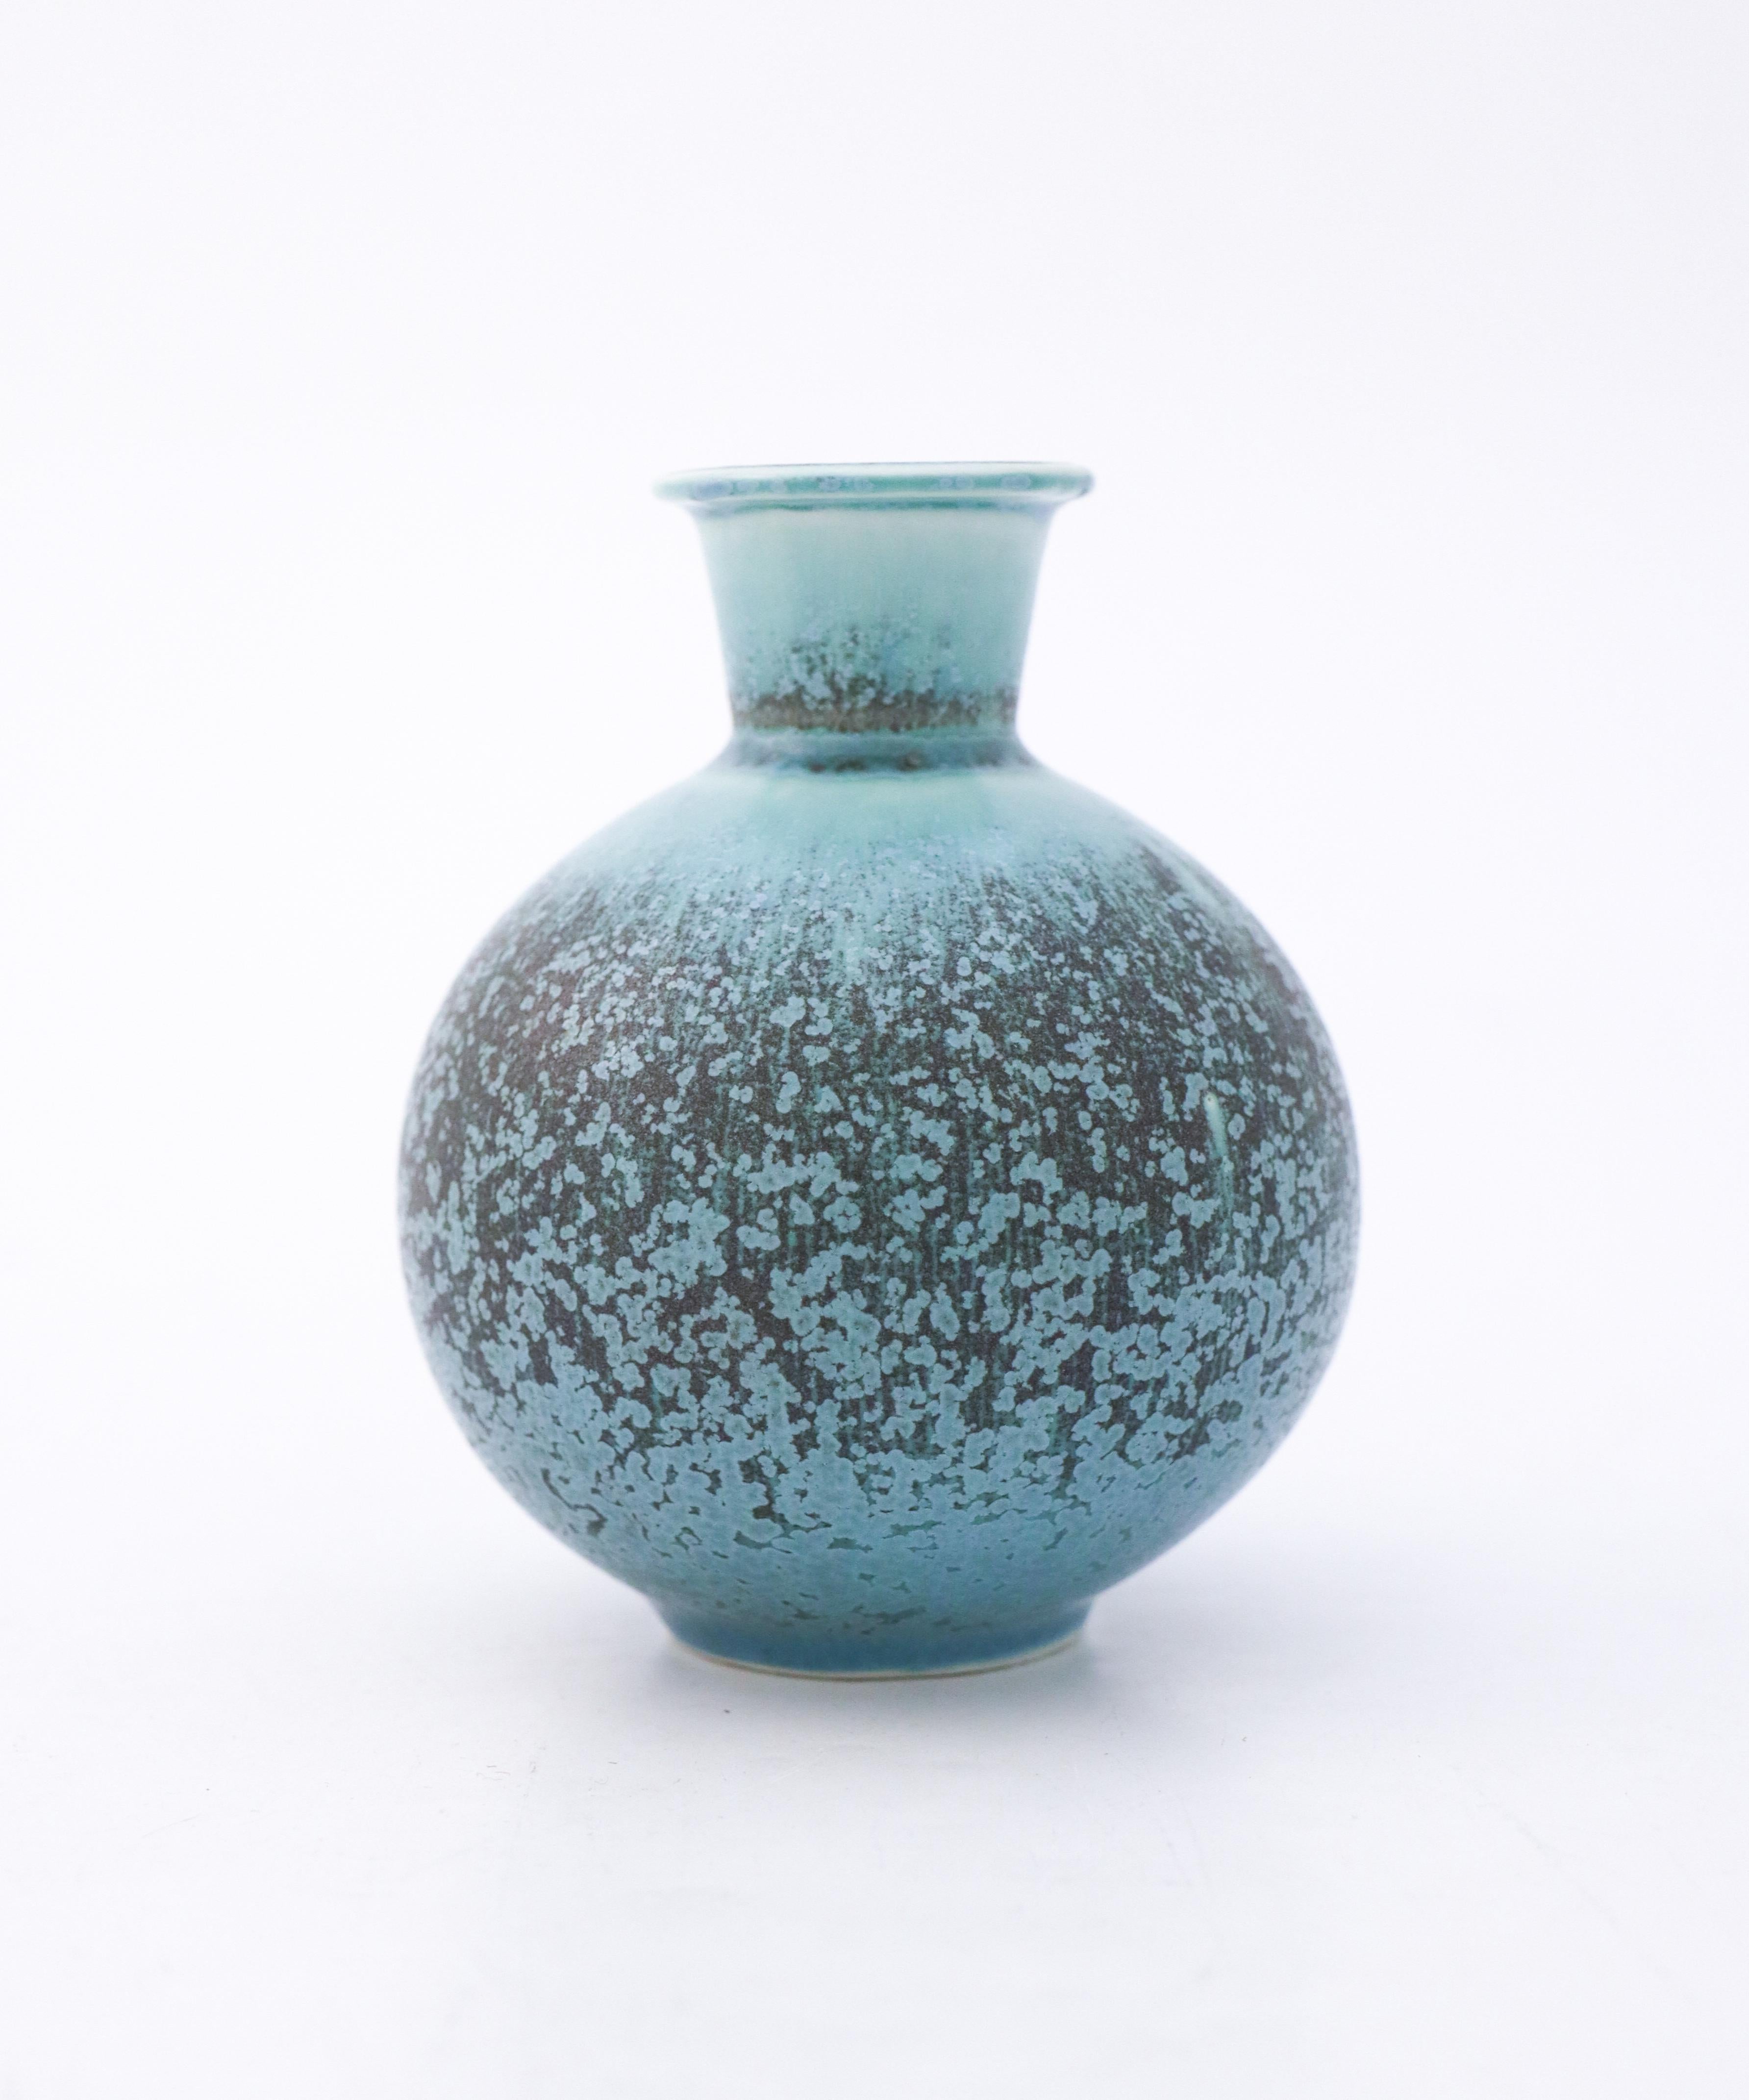 A vase in the serie selecta designed by Berndt Friberg at Gustavsberg in Stockholm with a stunning turquoise and blue glaze. This vase has one of the most spectacular glazes I ever have seen on a Berndt Friberg vase, the vase is 10,5 cm (4.2